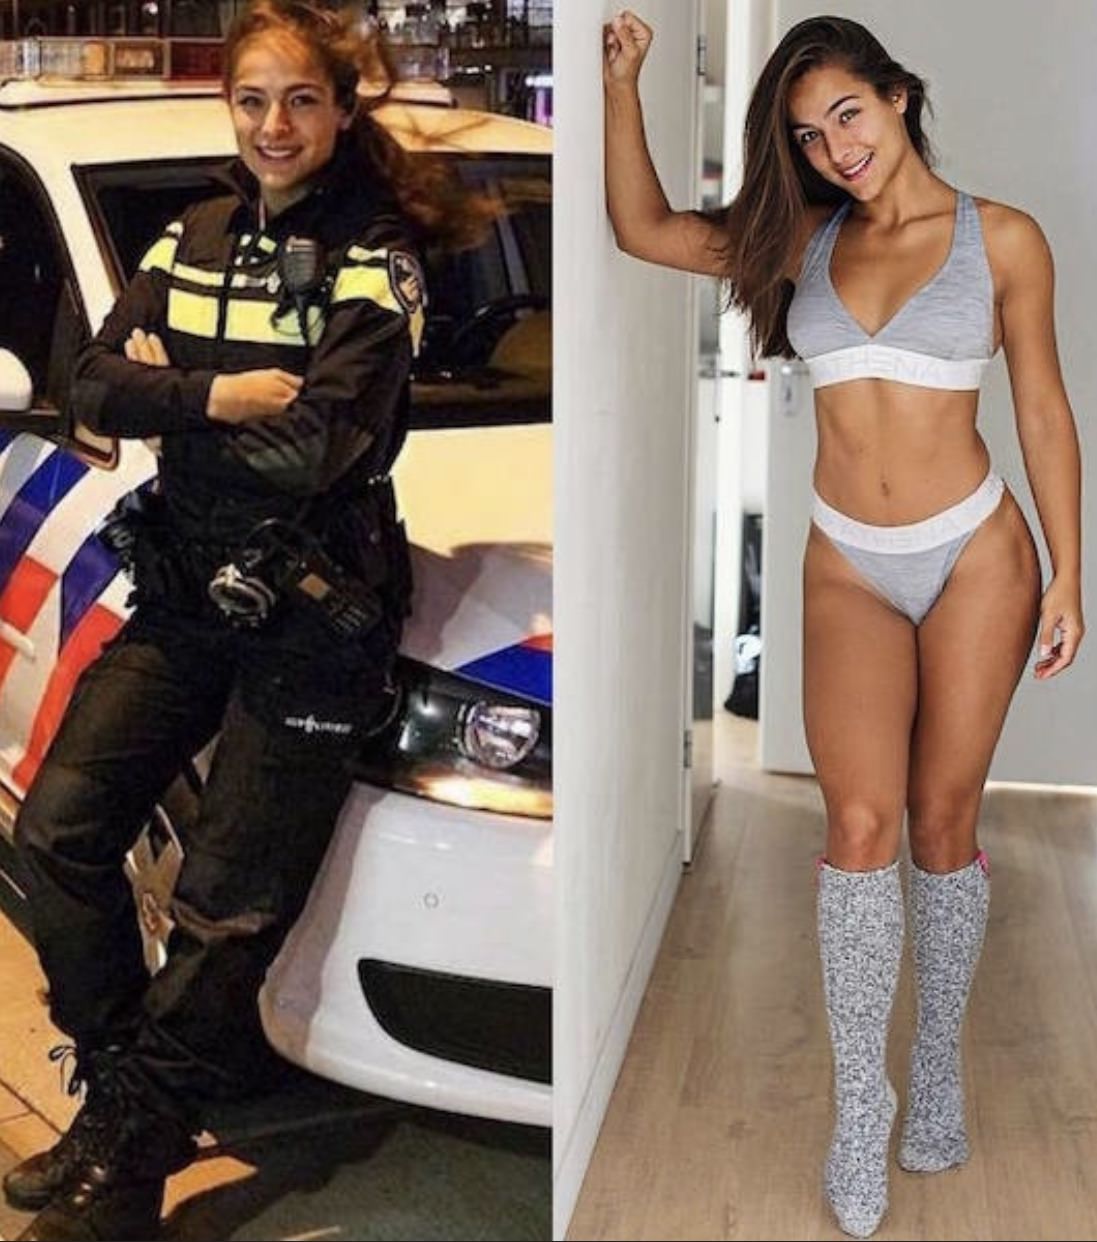 Sexy woman police officer in uniform and a picture of her in bra and panties smiling